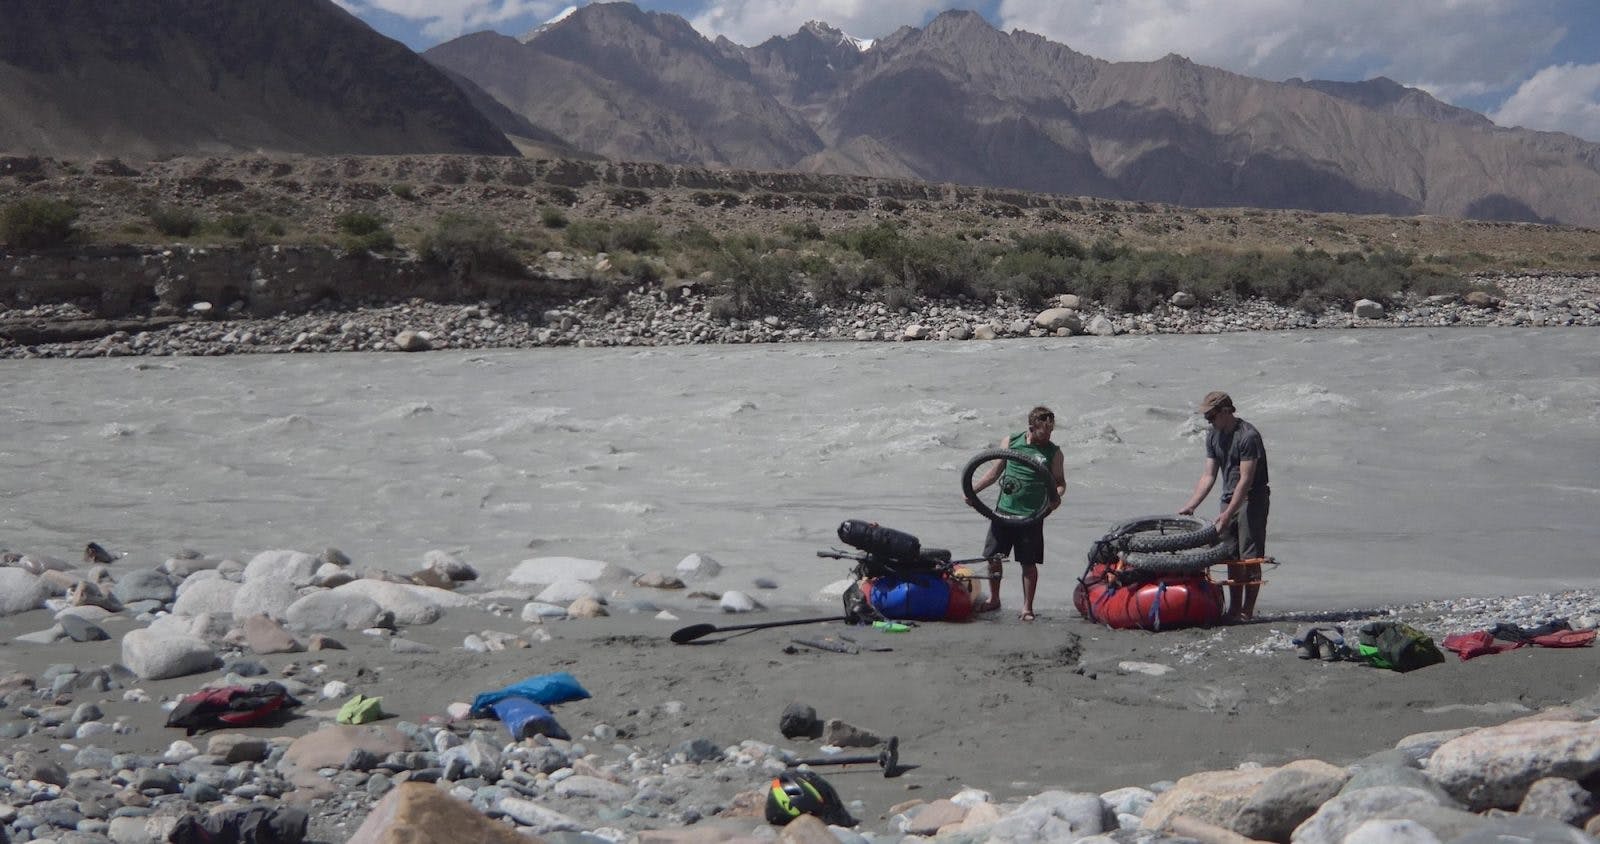 Mike McGrath pack rafting the Sary Jaz River, Kyrgyzstan.